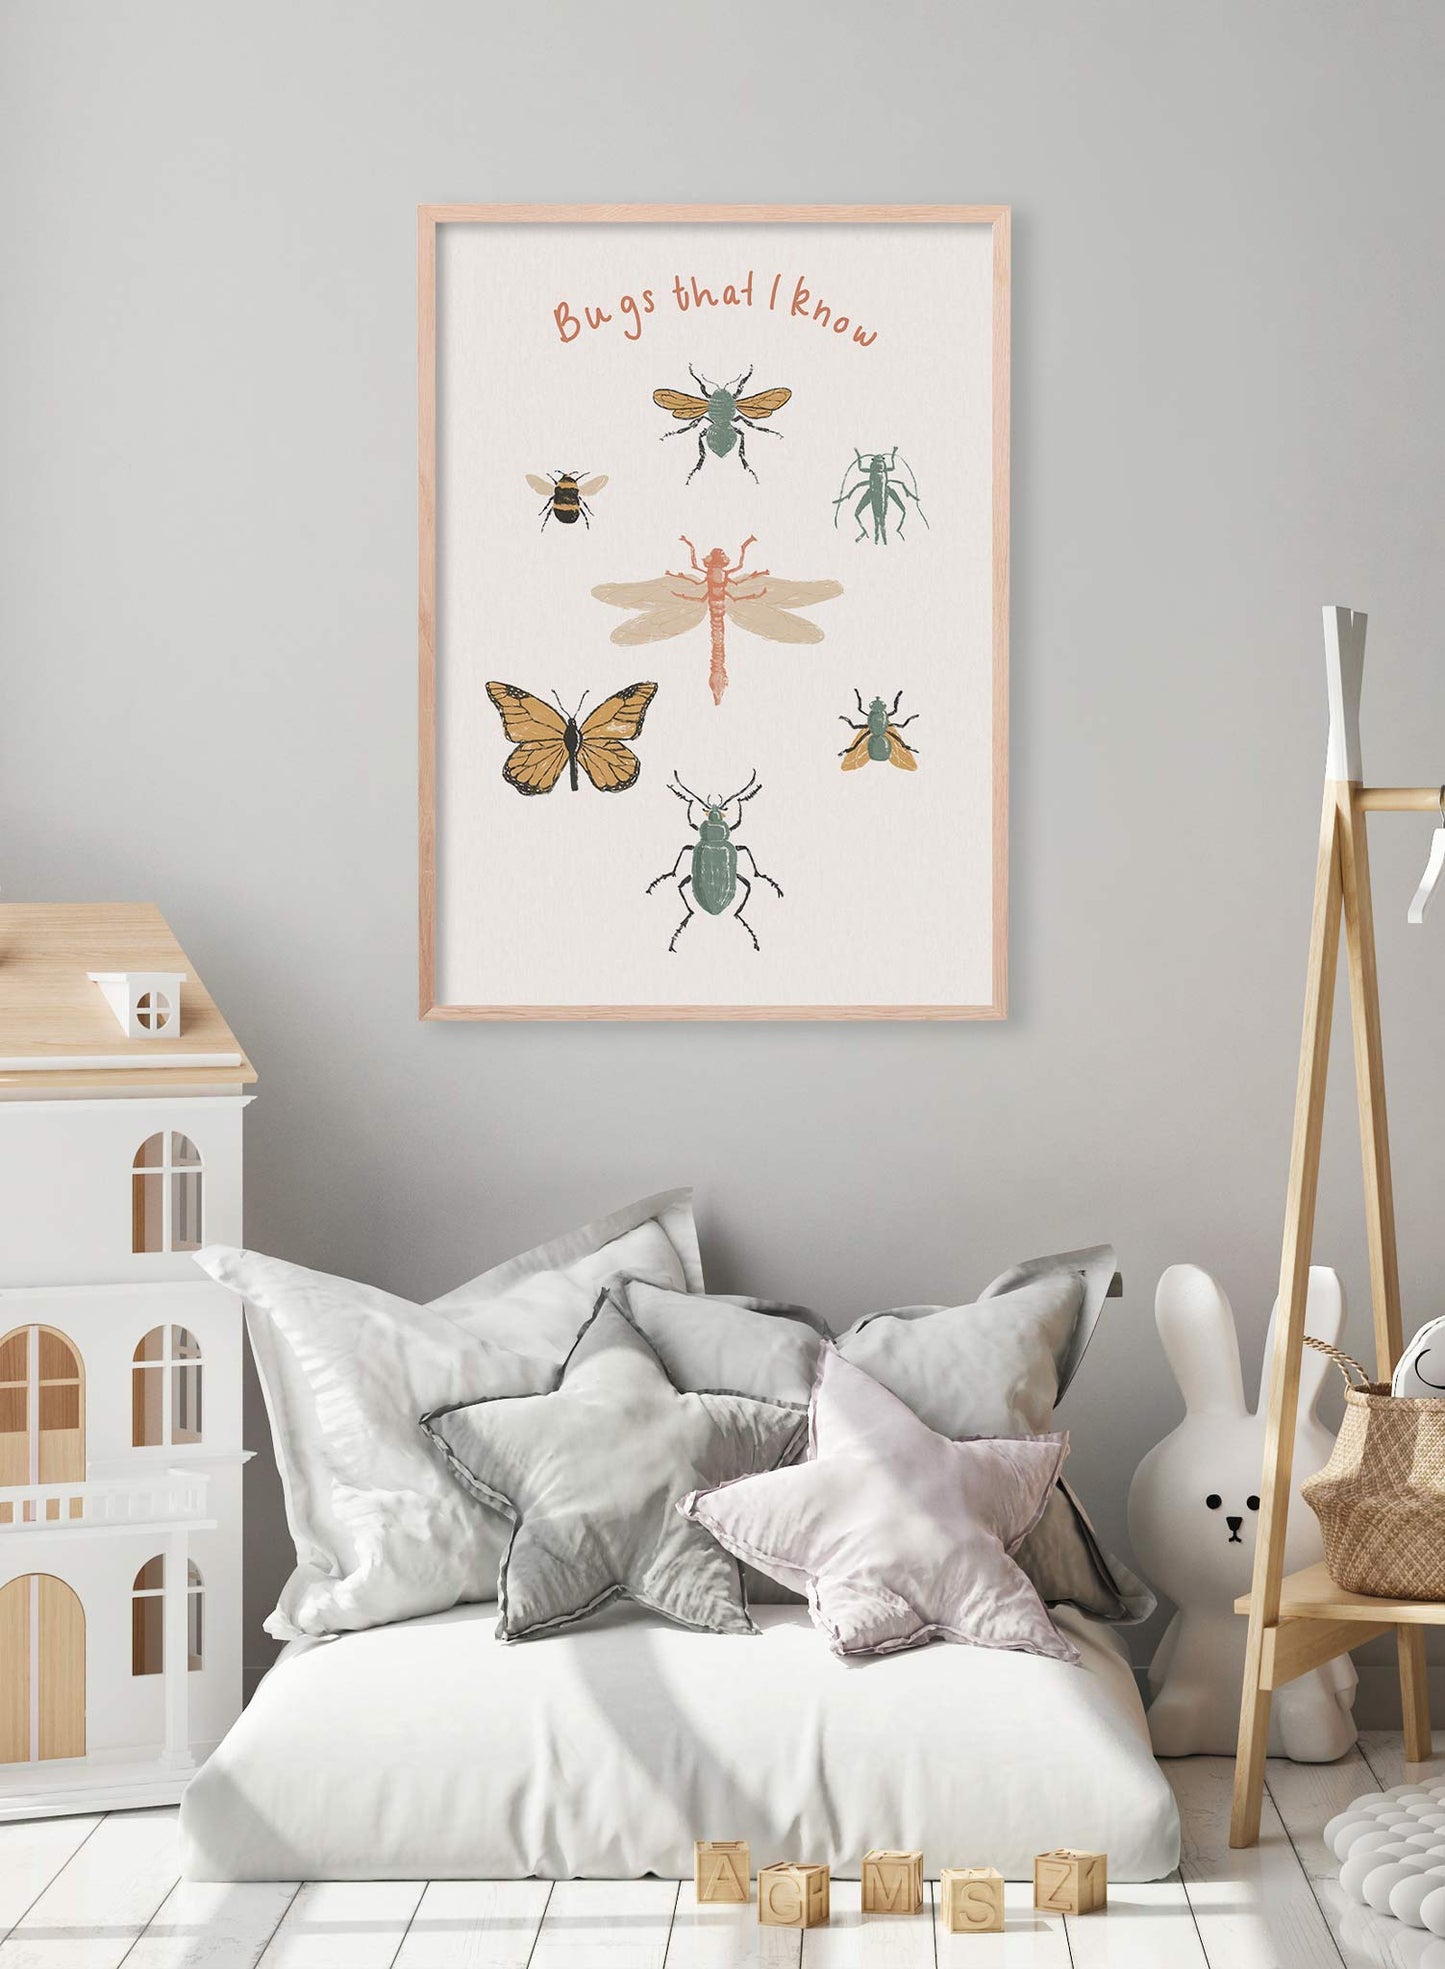 Bug's Life is a minimalist illustration by Opposite Wall of seven different types of commonly found bugs.